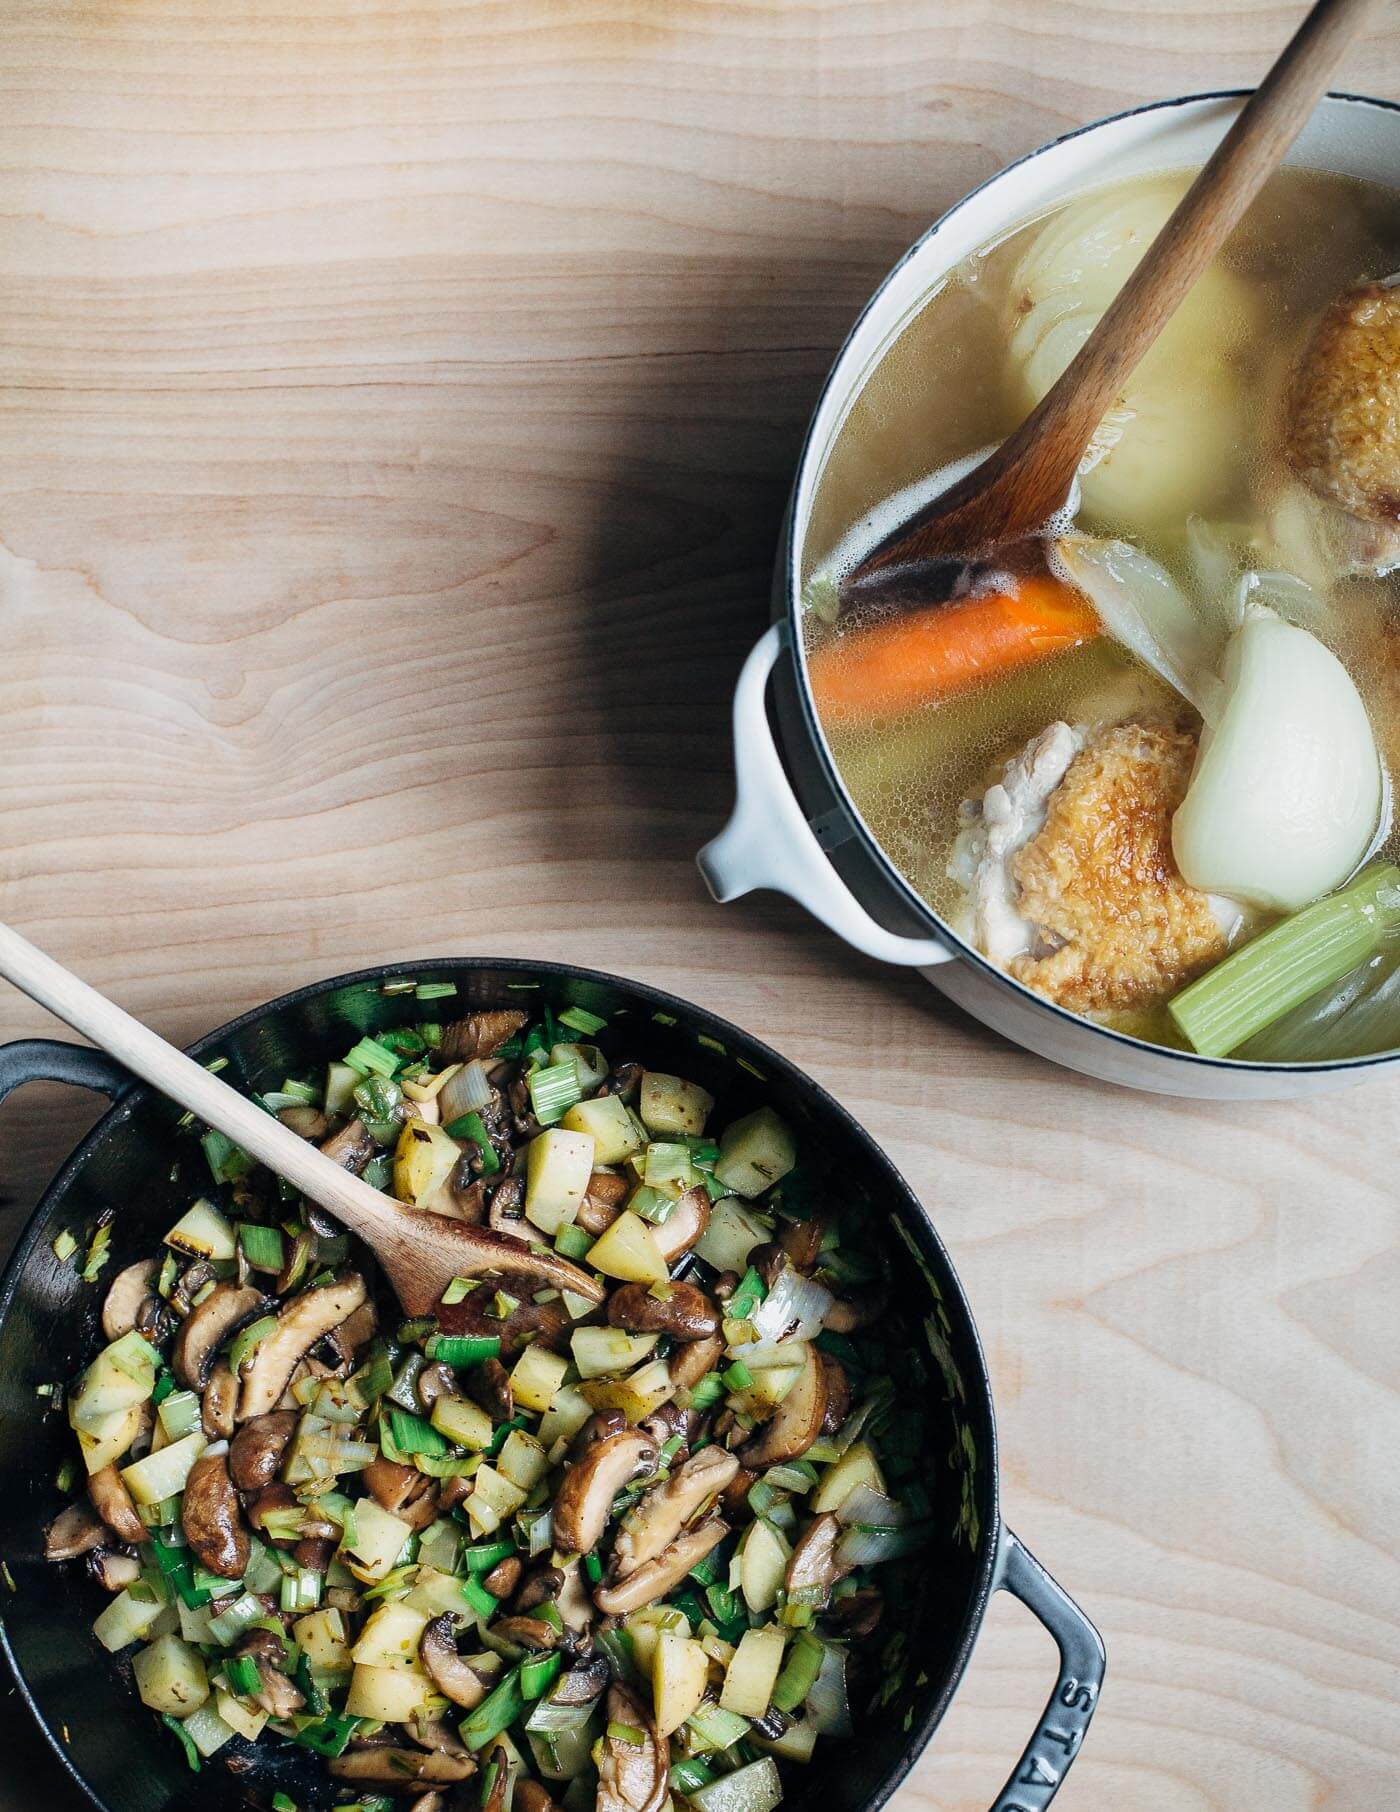 A quick chicken broth and sautéed mushrooms and leeks. 